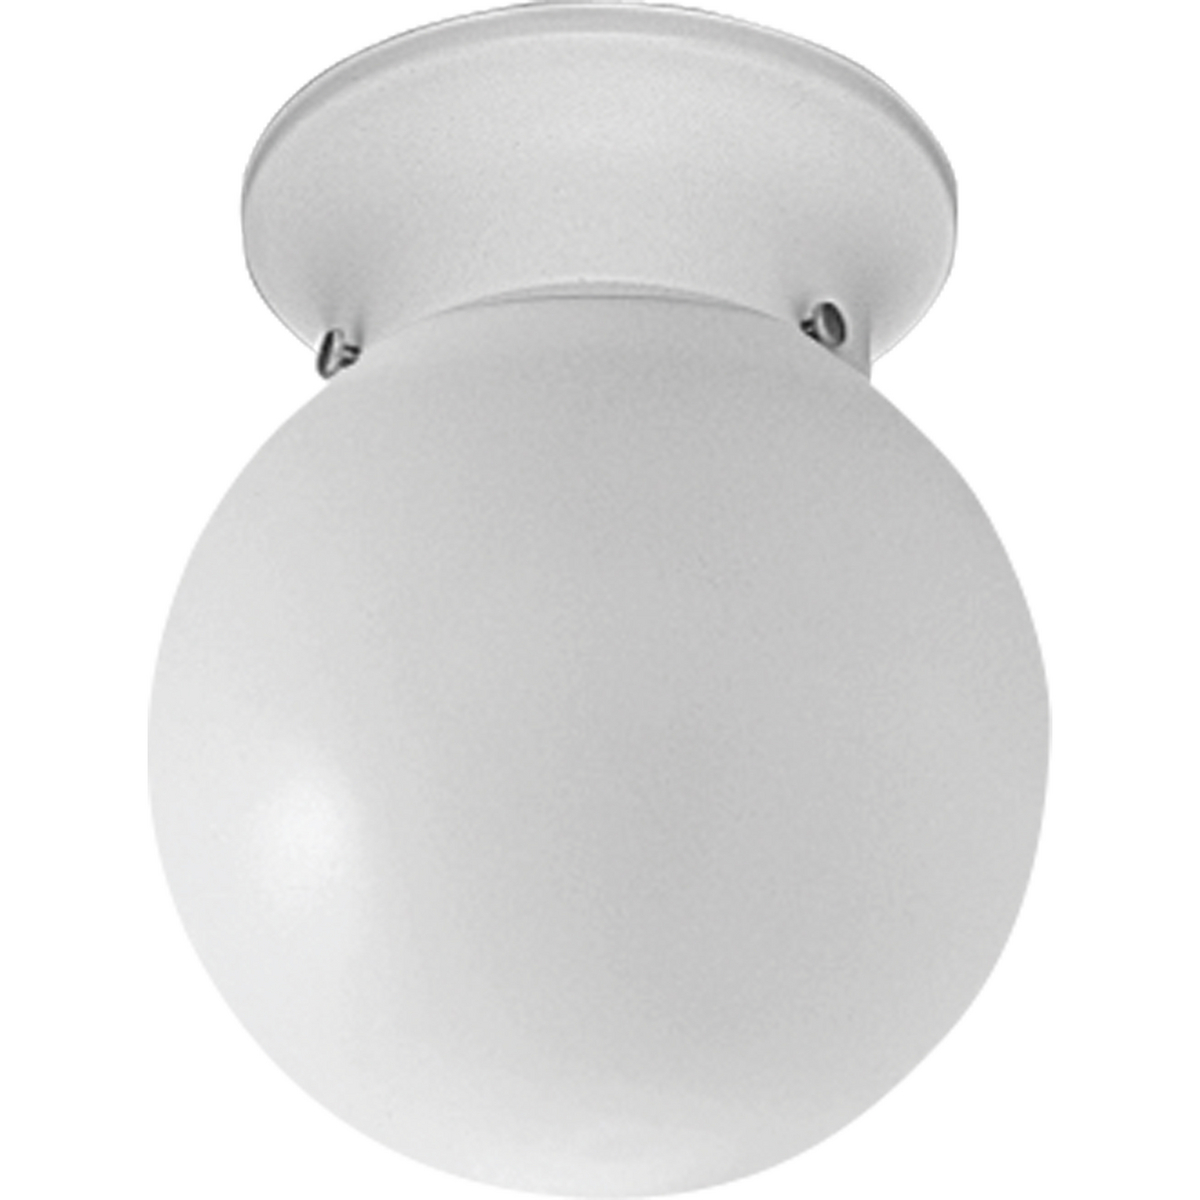 Flush mount ceiling fixture with white glass globe. K.O for pull chain switch. Globe held in place with three thumb screws.